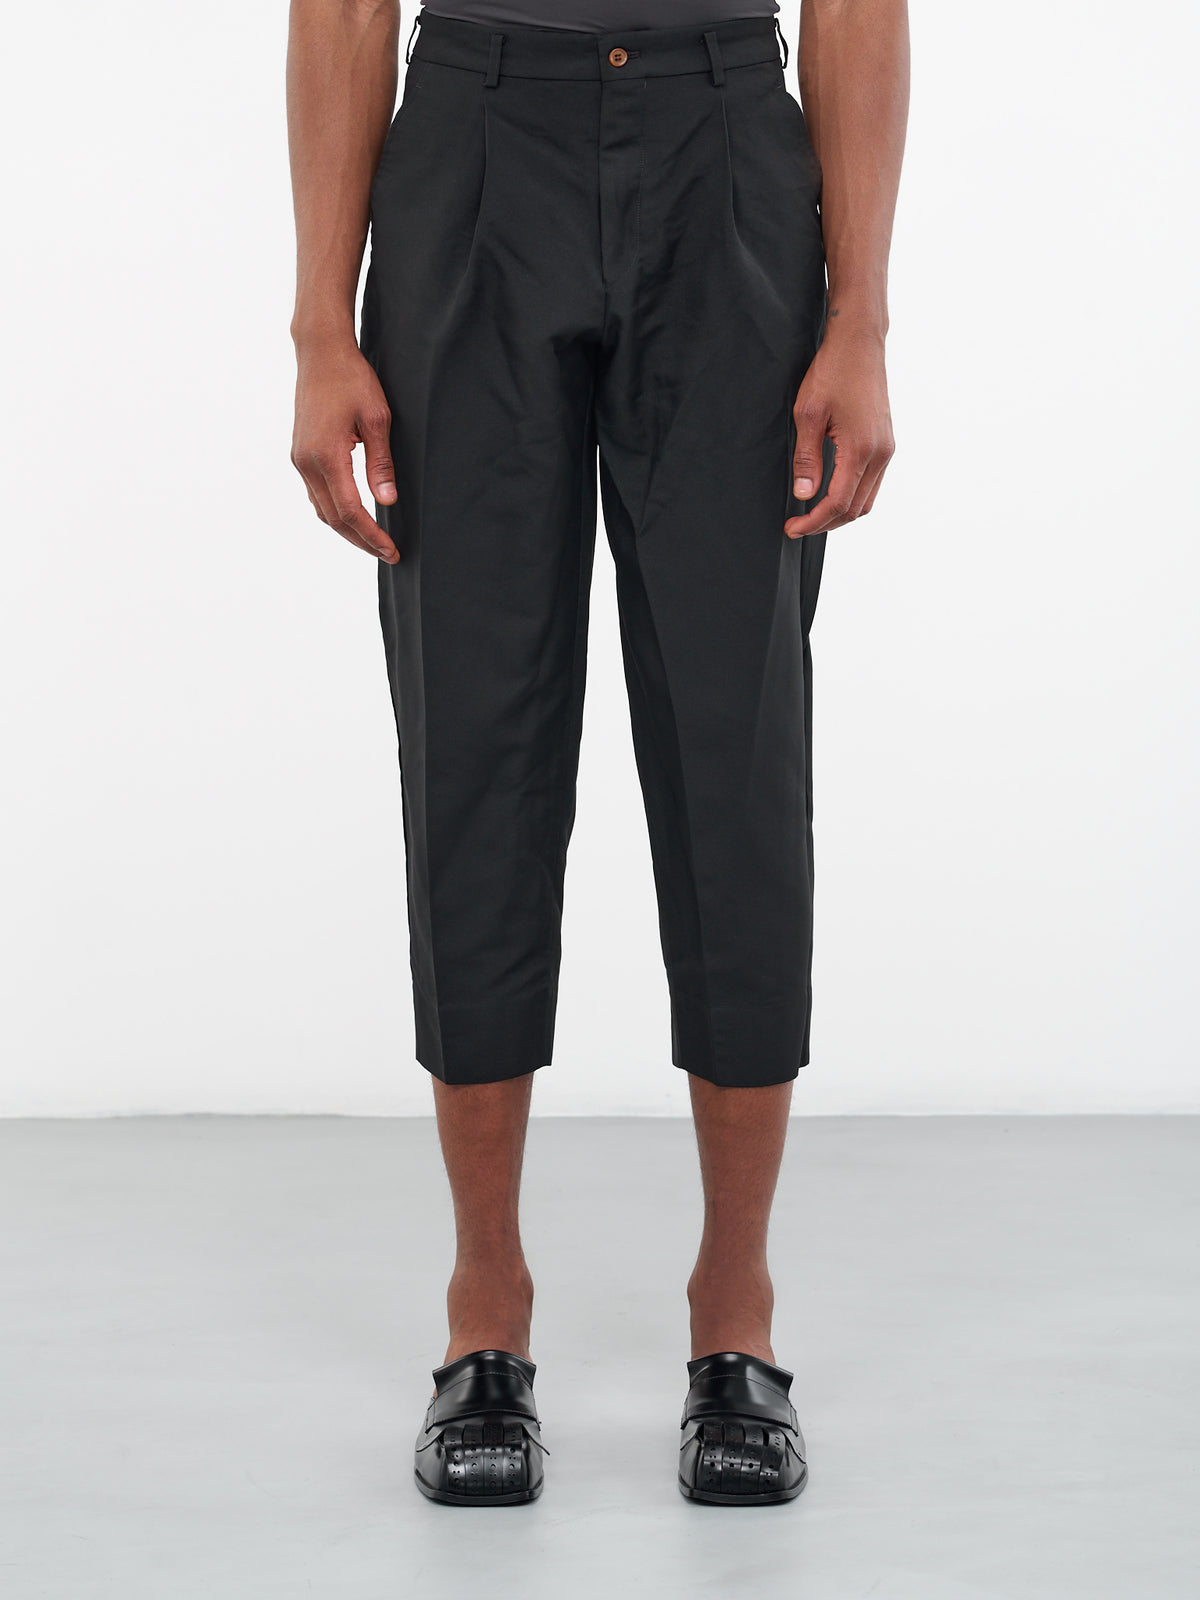 Cropped Tailored Trousers (PK-P046-051-BLACK)